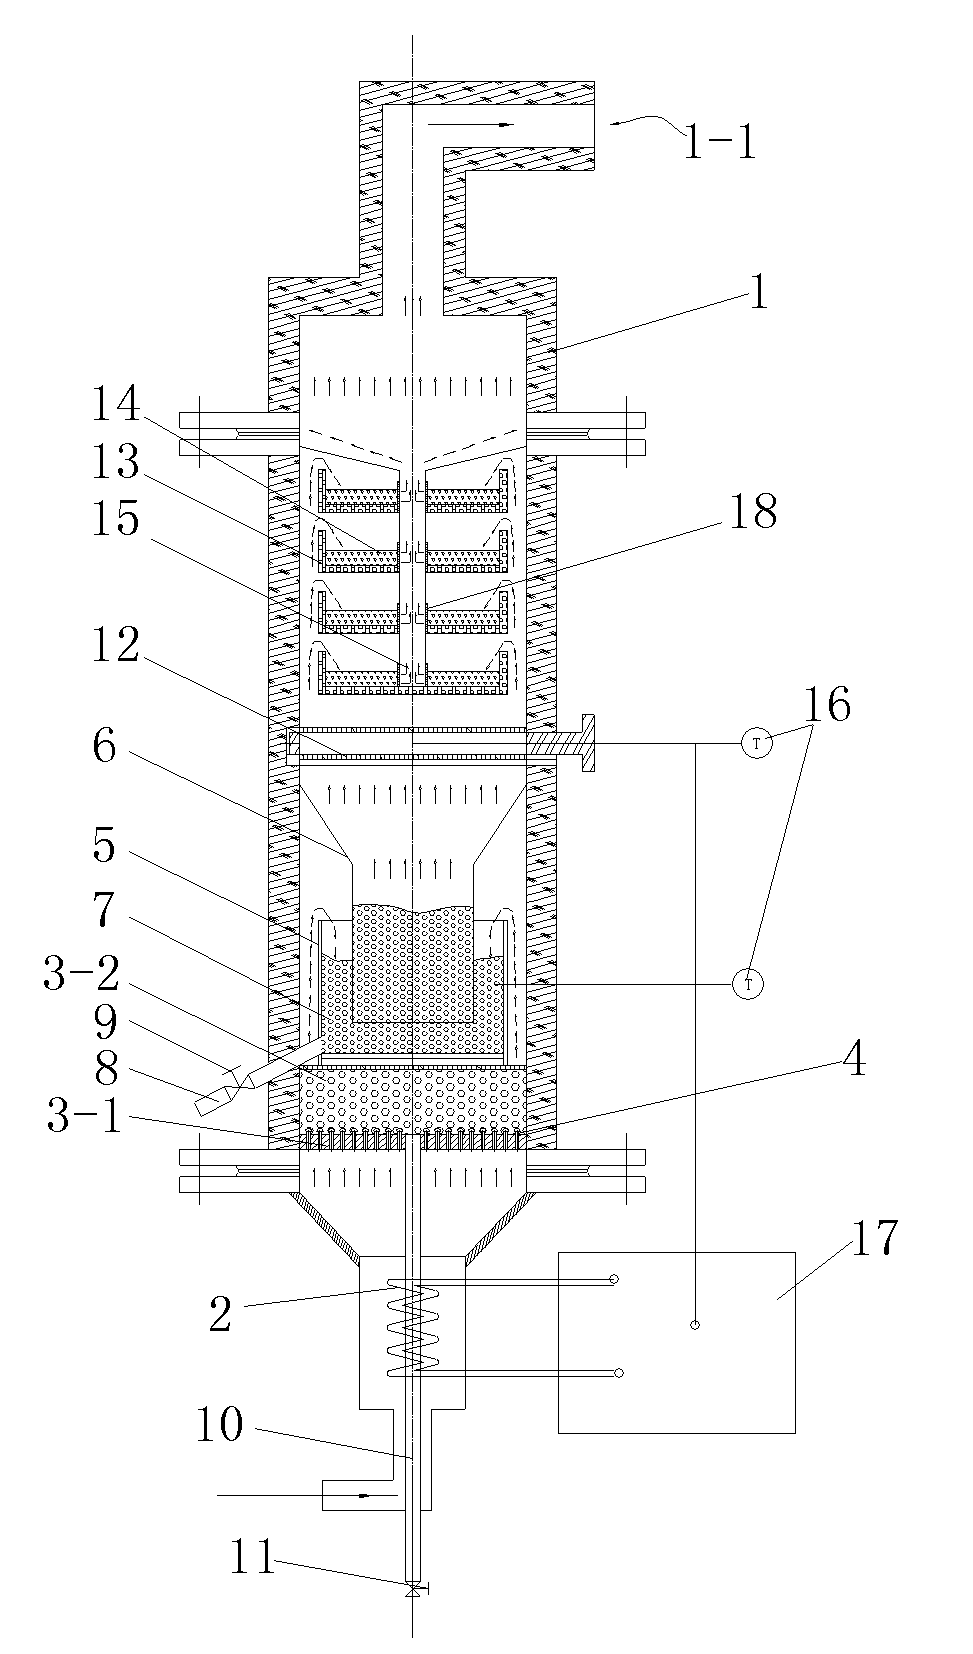 Device for catalytic denitration reaction by preheating waste incineration flue gas